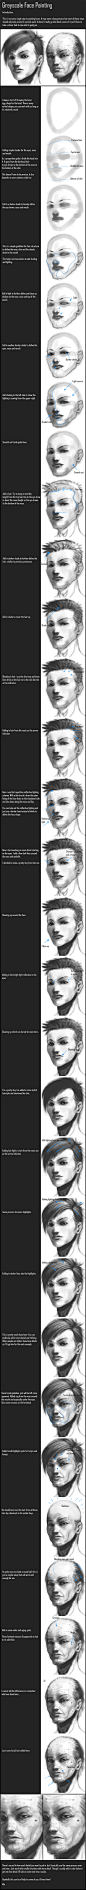 Tutorial: Greyscale Face Paint by minties on deviantART